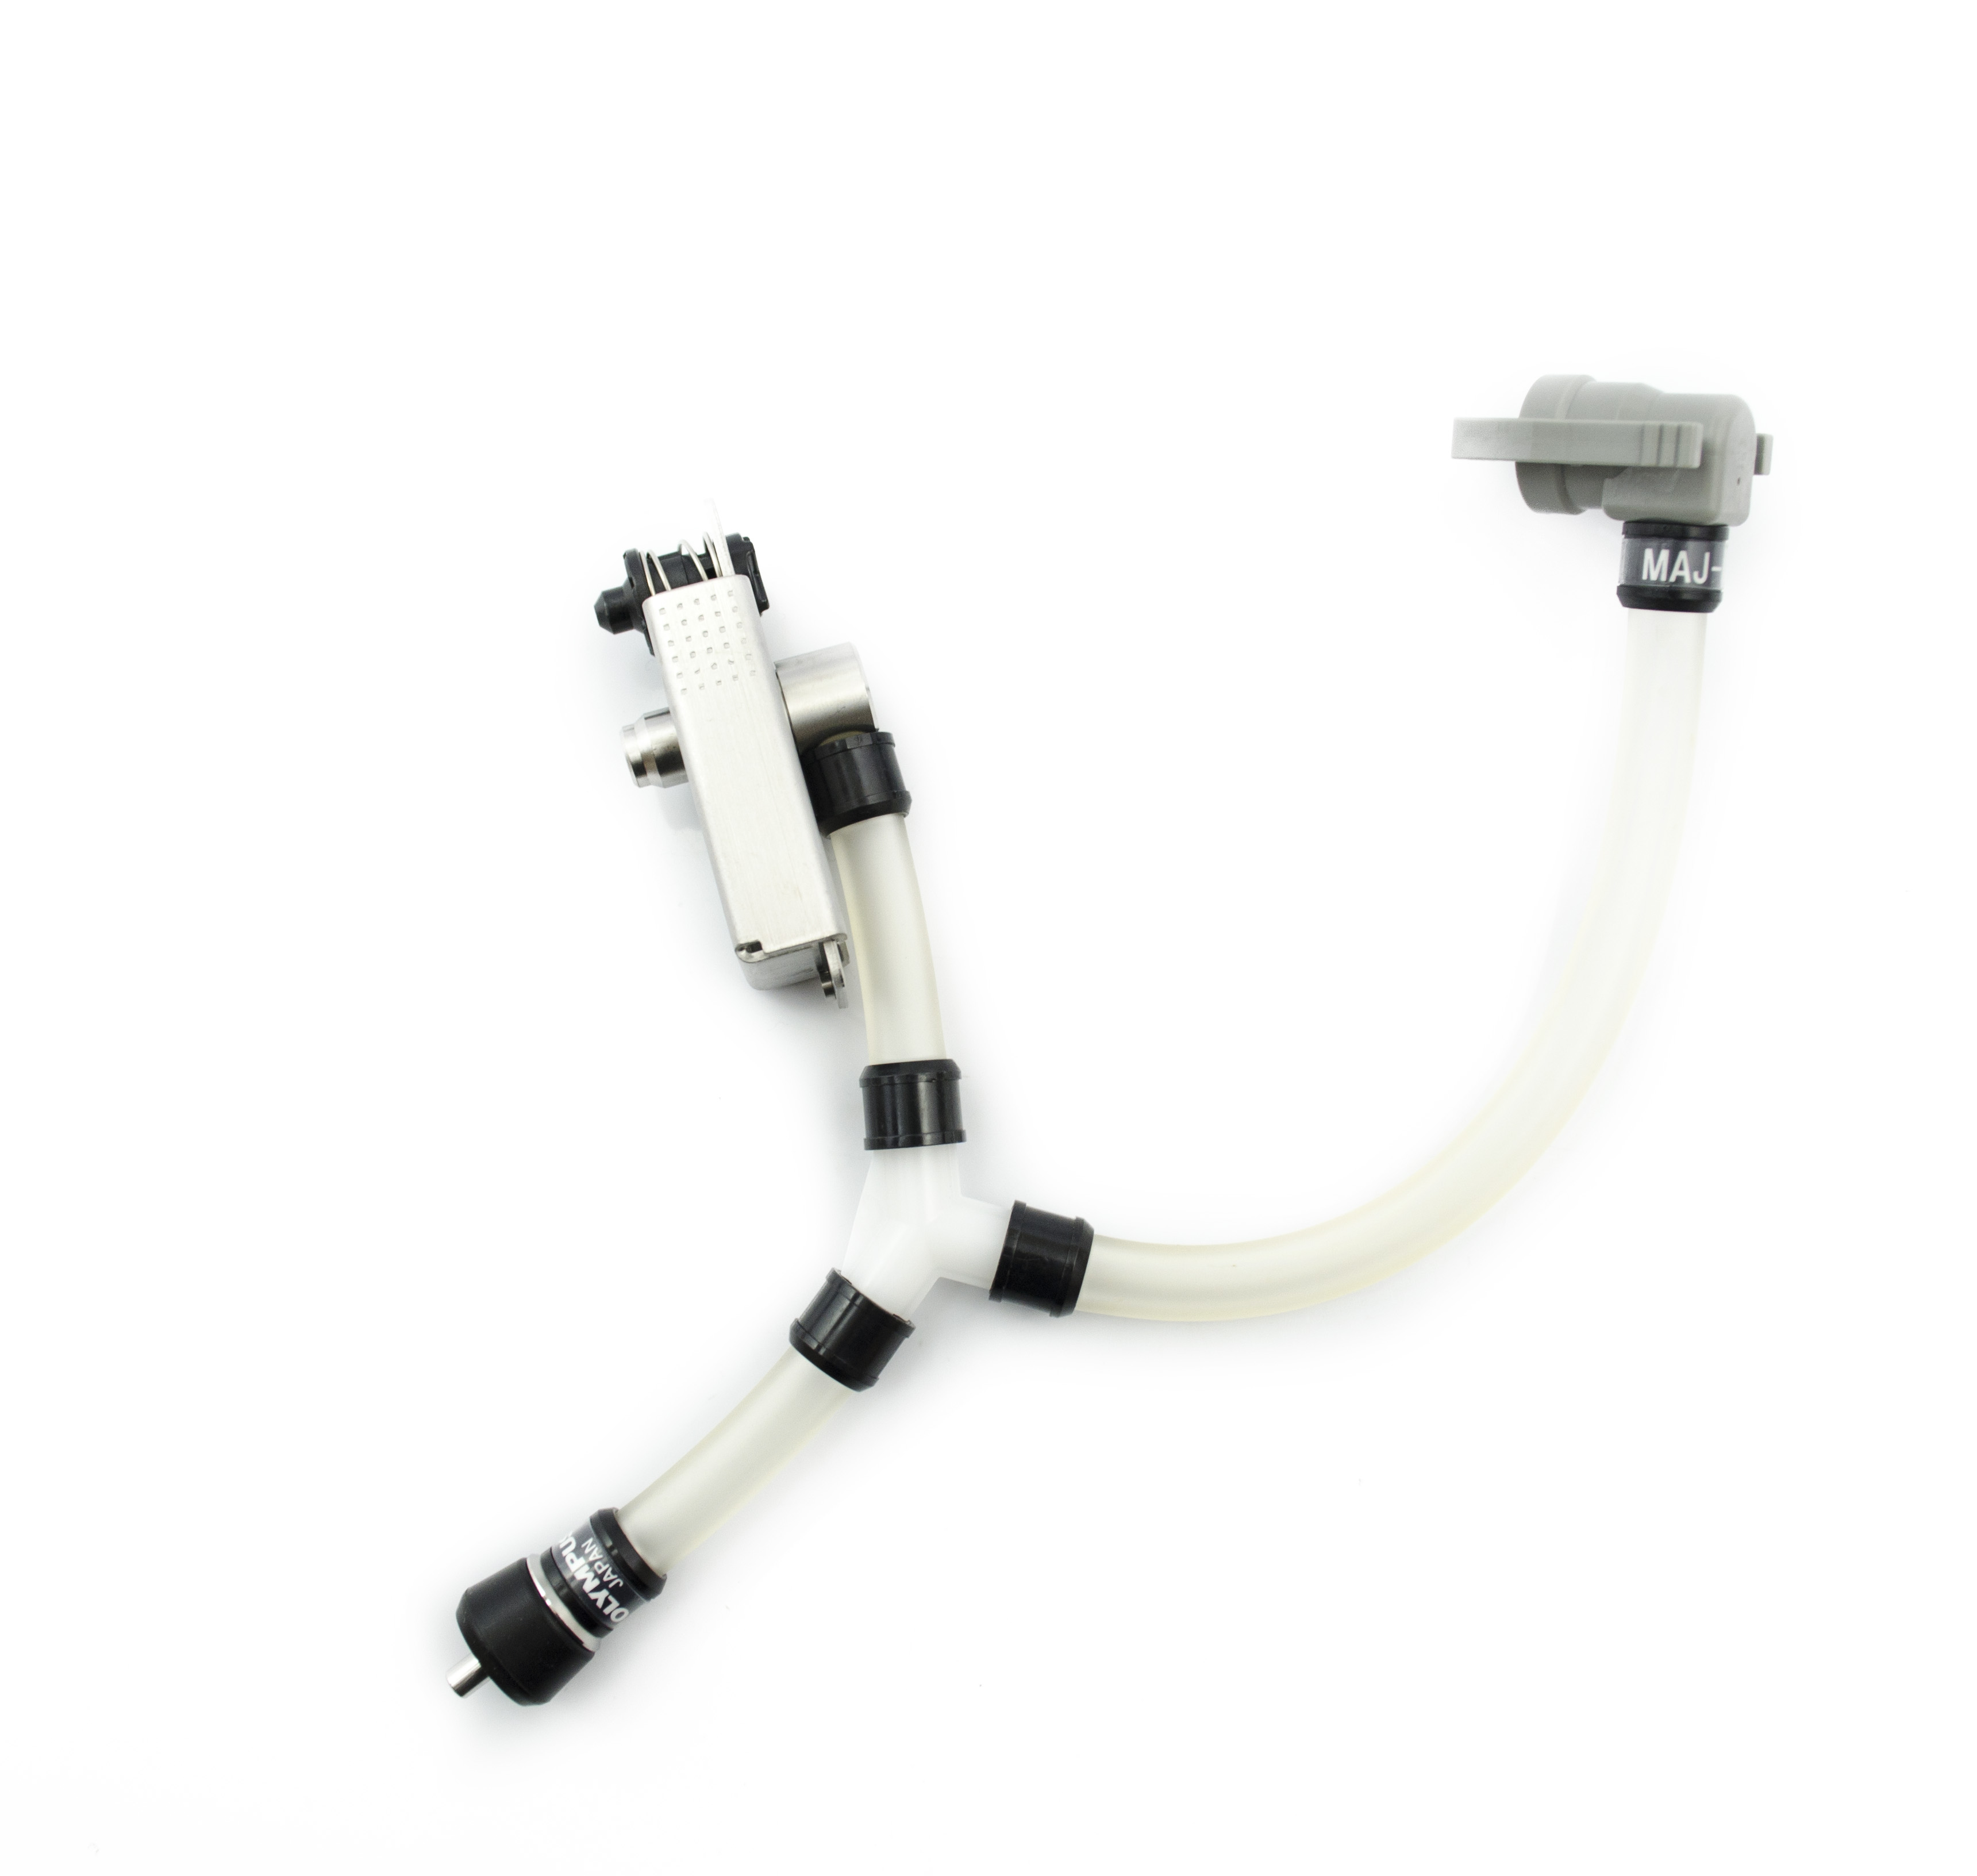 Olympus Reusable Connecting Tube - MAJ-1500: For OER Pro Endoscope Reprocessor (Washer) (Original Packaging)